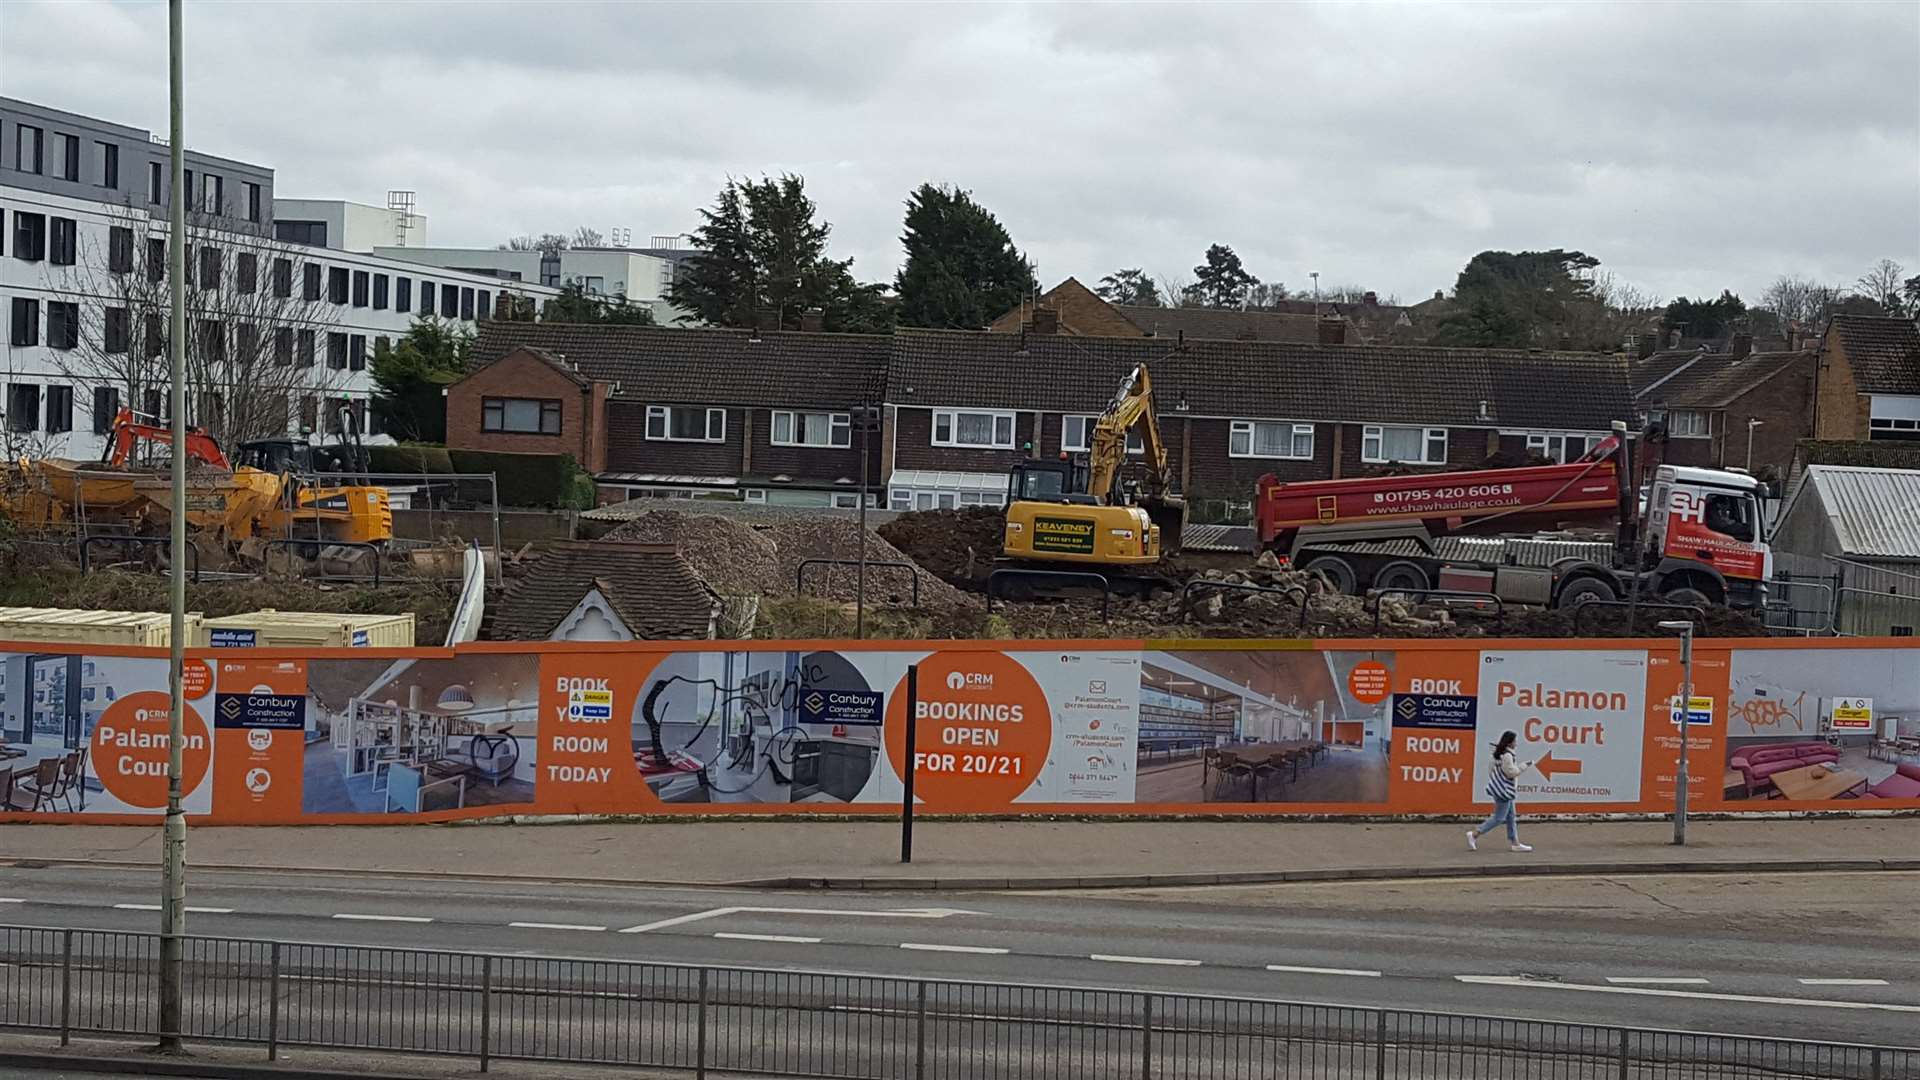 The St Mary Bredin School has now been demolished